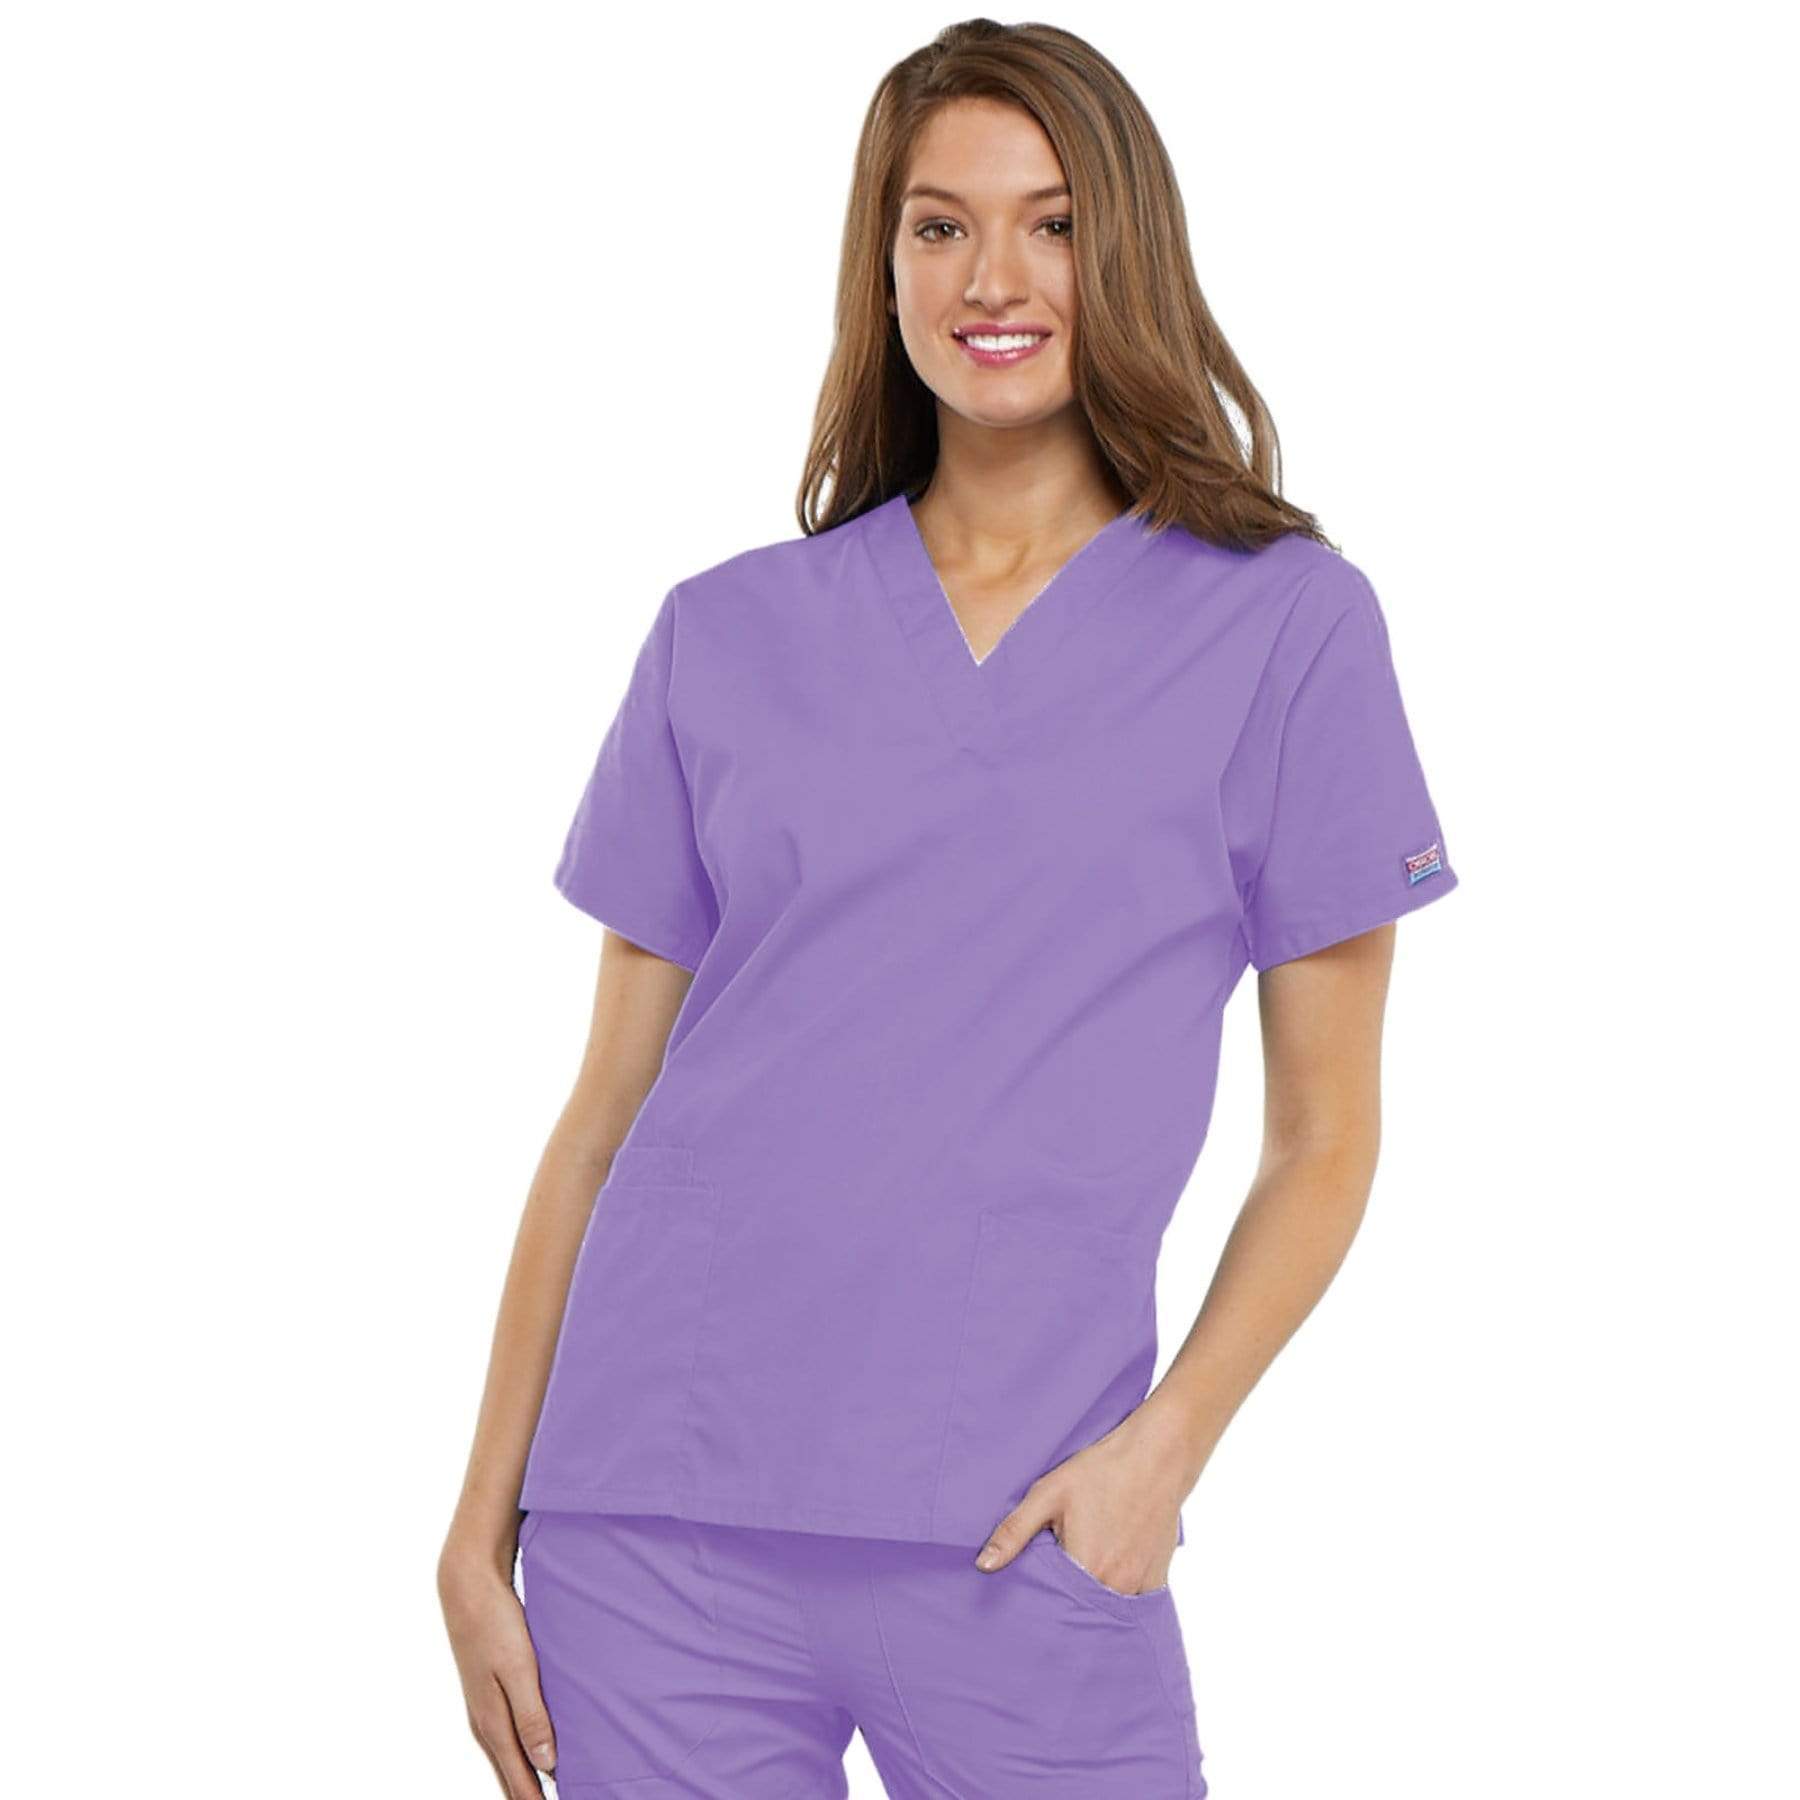 What Do Different Colored Scrubs Mean? – Noel Asmar Uniforms